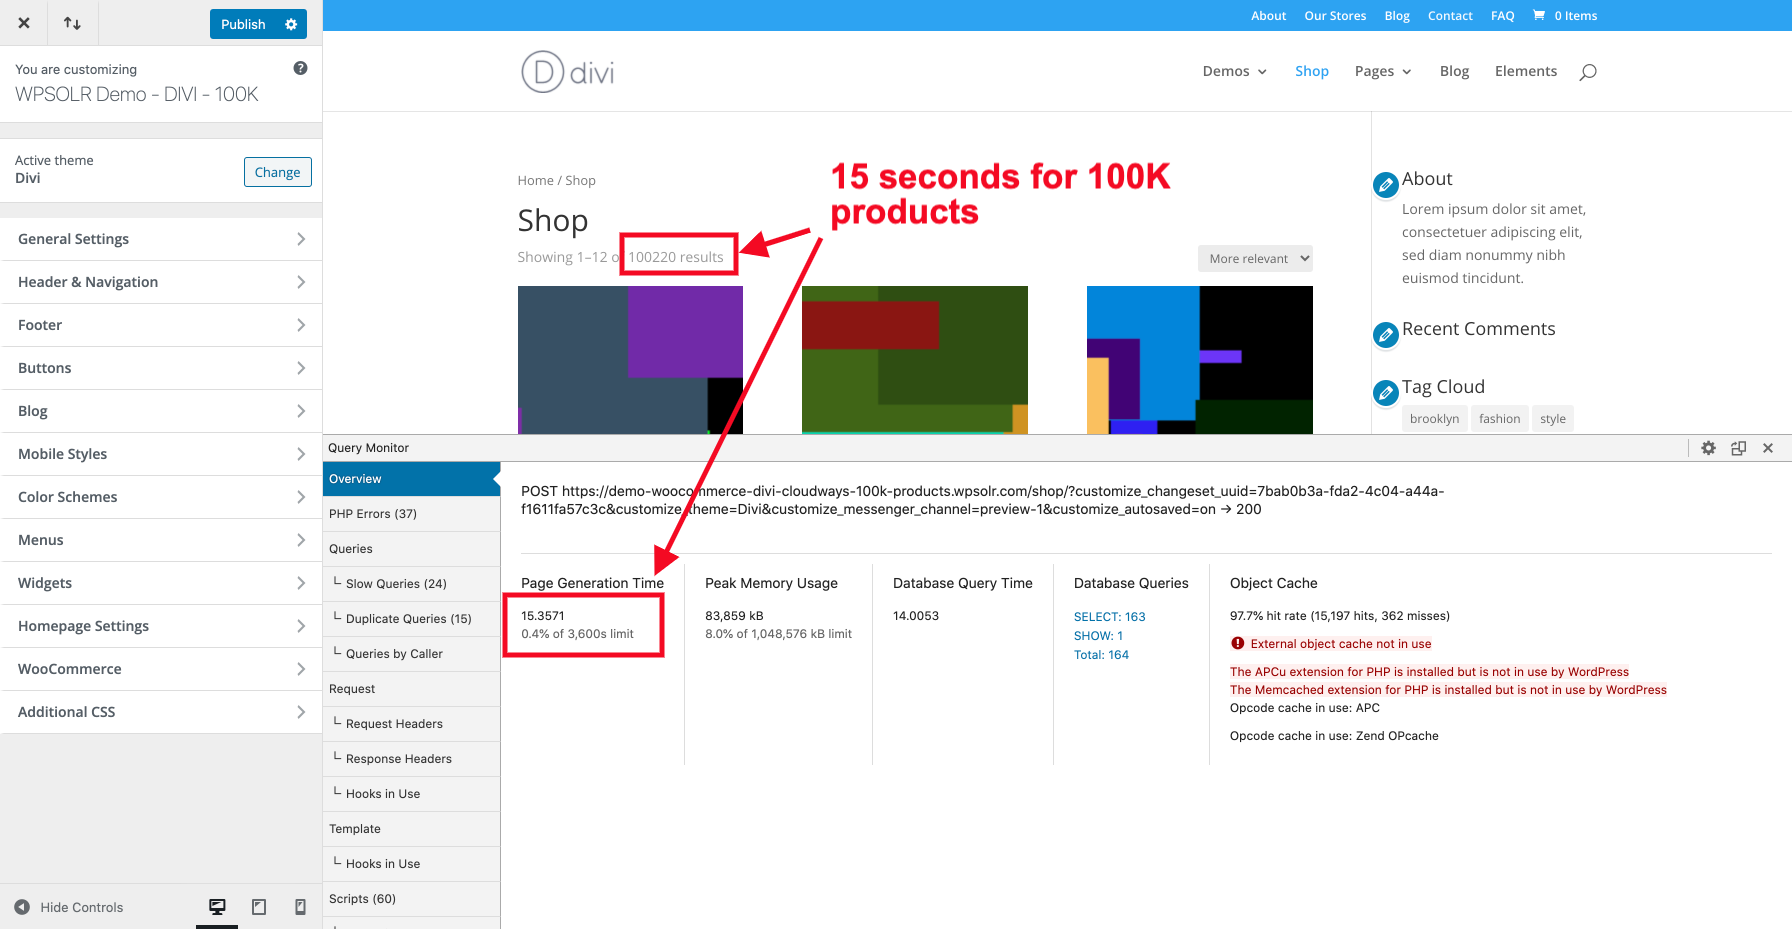 Image wpsolr-demo-divi-100k-15-seconds.png of Why DIVI load time is 15 seconds on a shop with 100K products